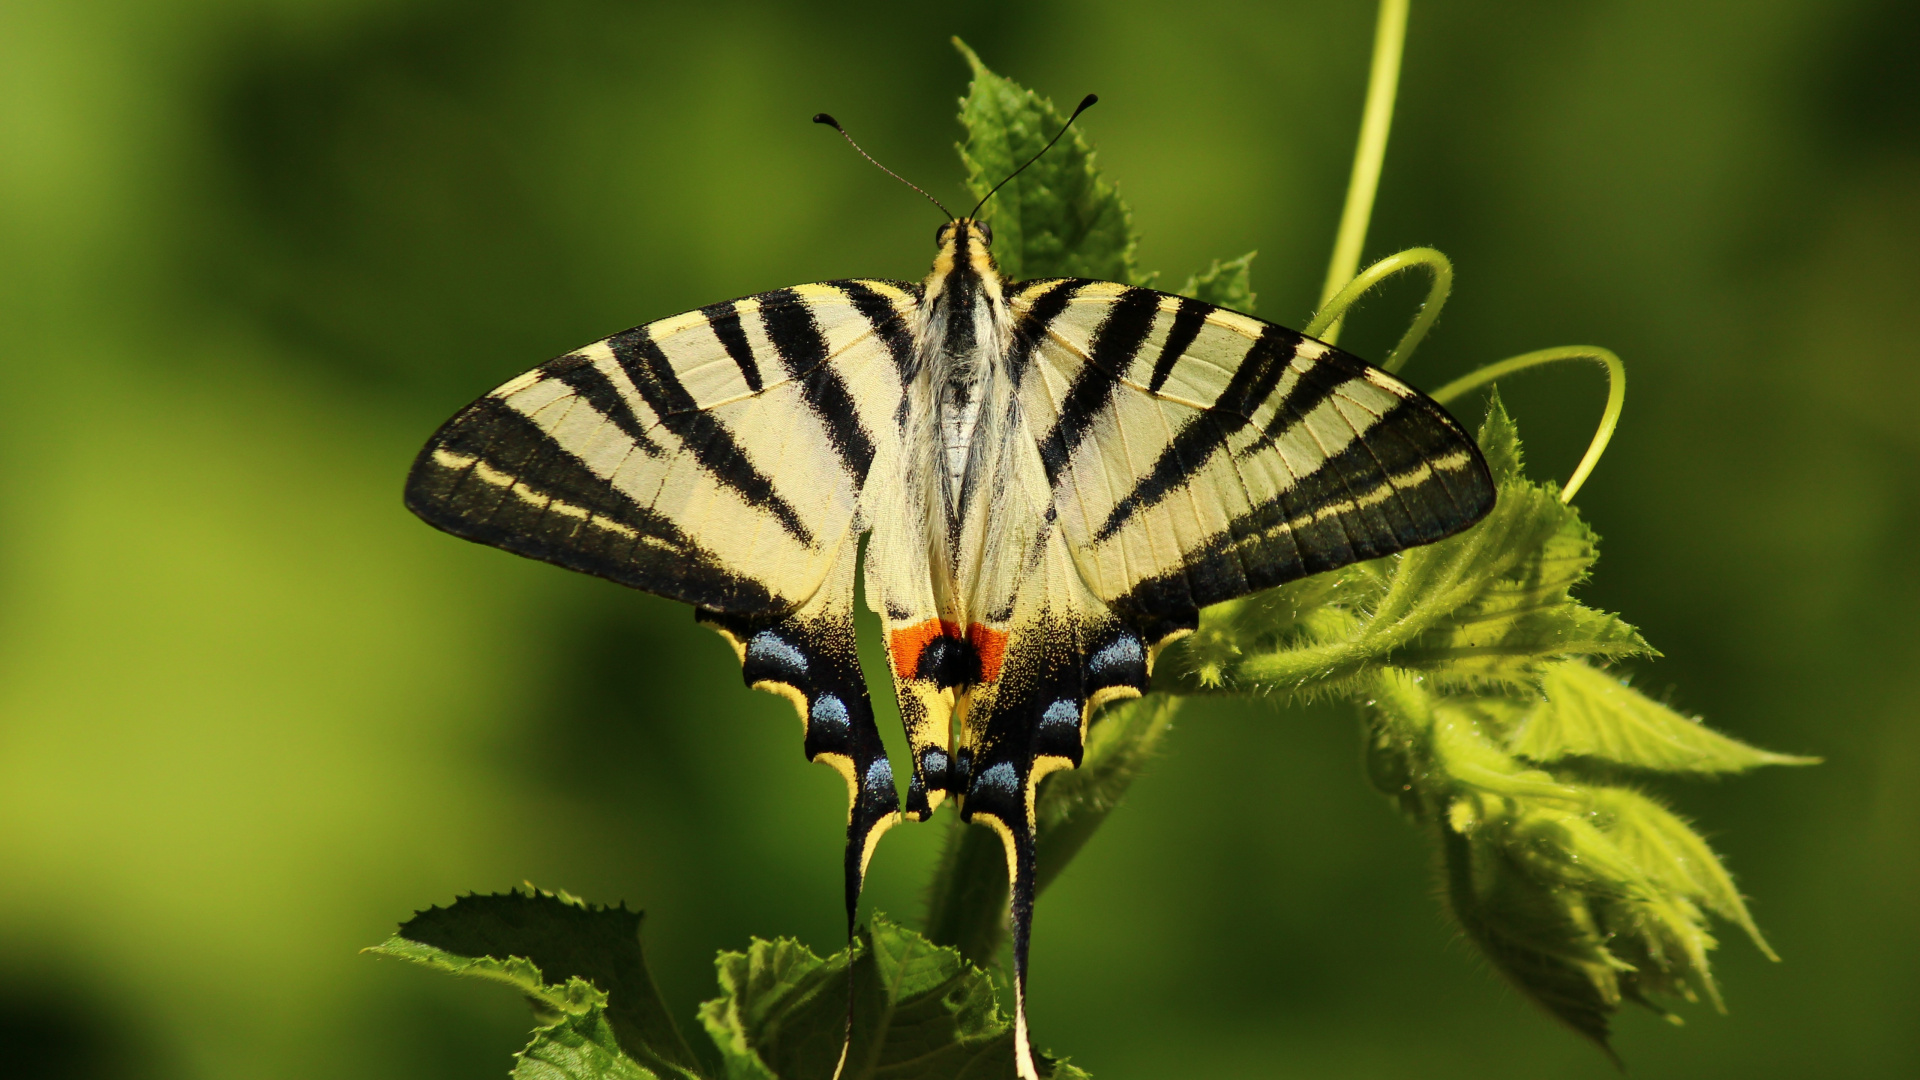 Zebra Swallowtail Butterfly Perched on Green Leaf in Close up Photography During Daytime. Wallpaper in 1920x1080 Resolution